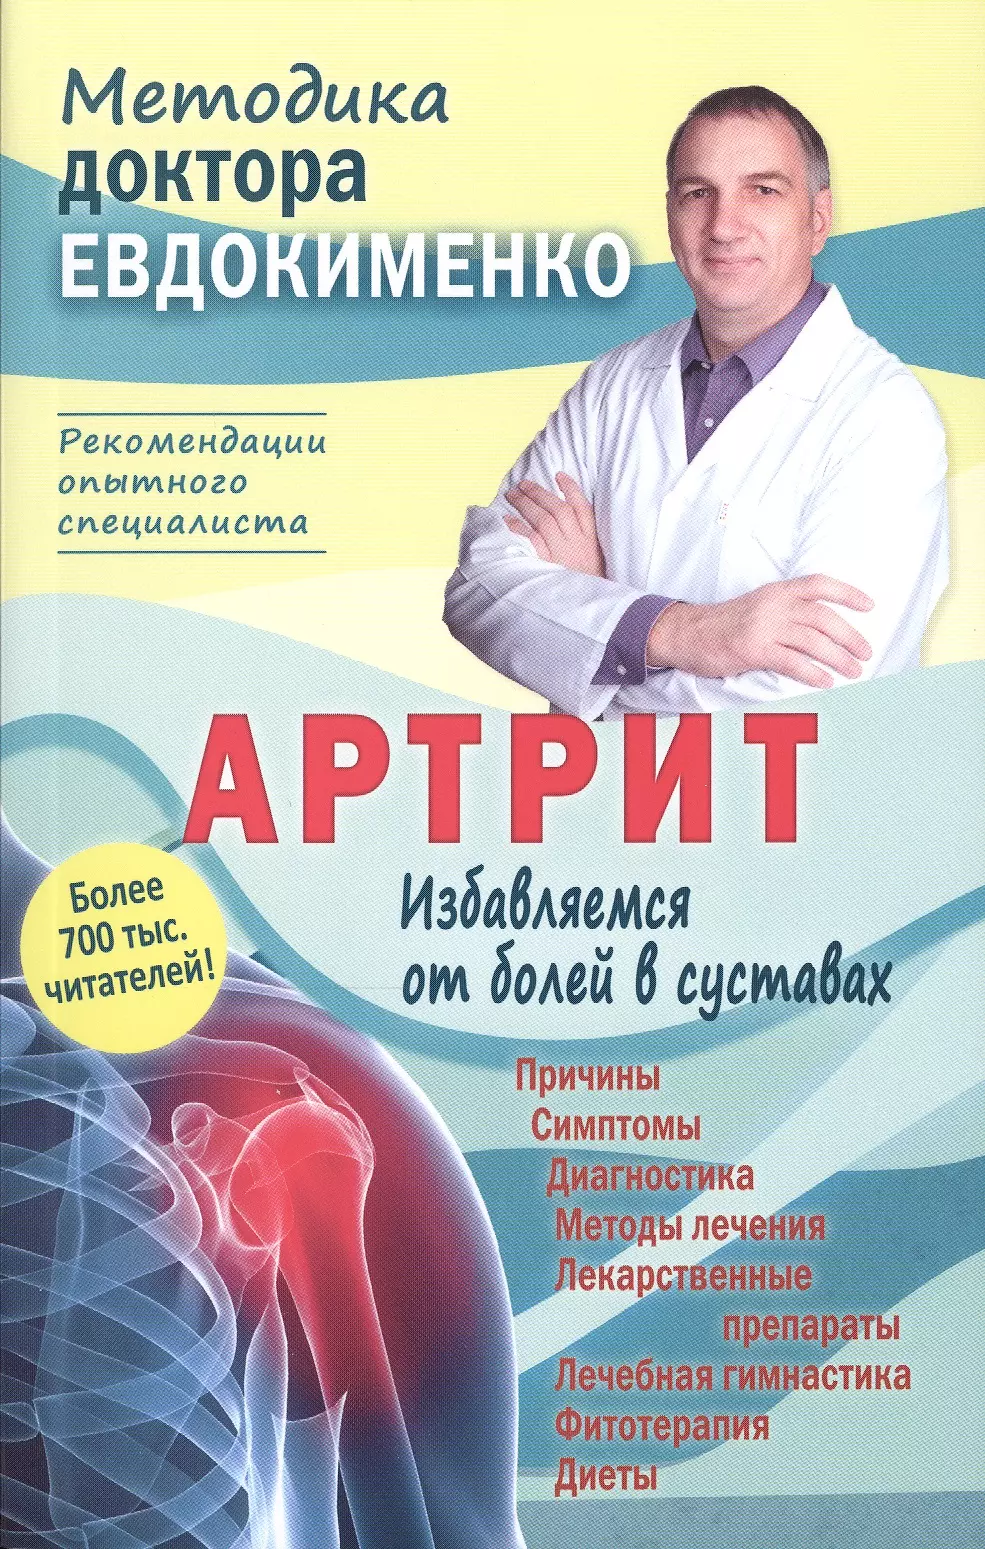 Your Doctor # by Michael Mirochnik - Issuu